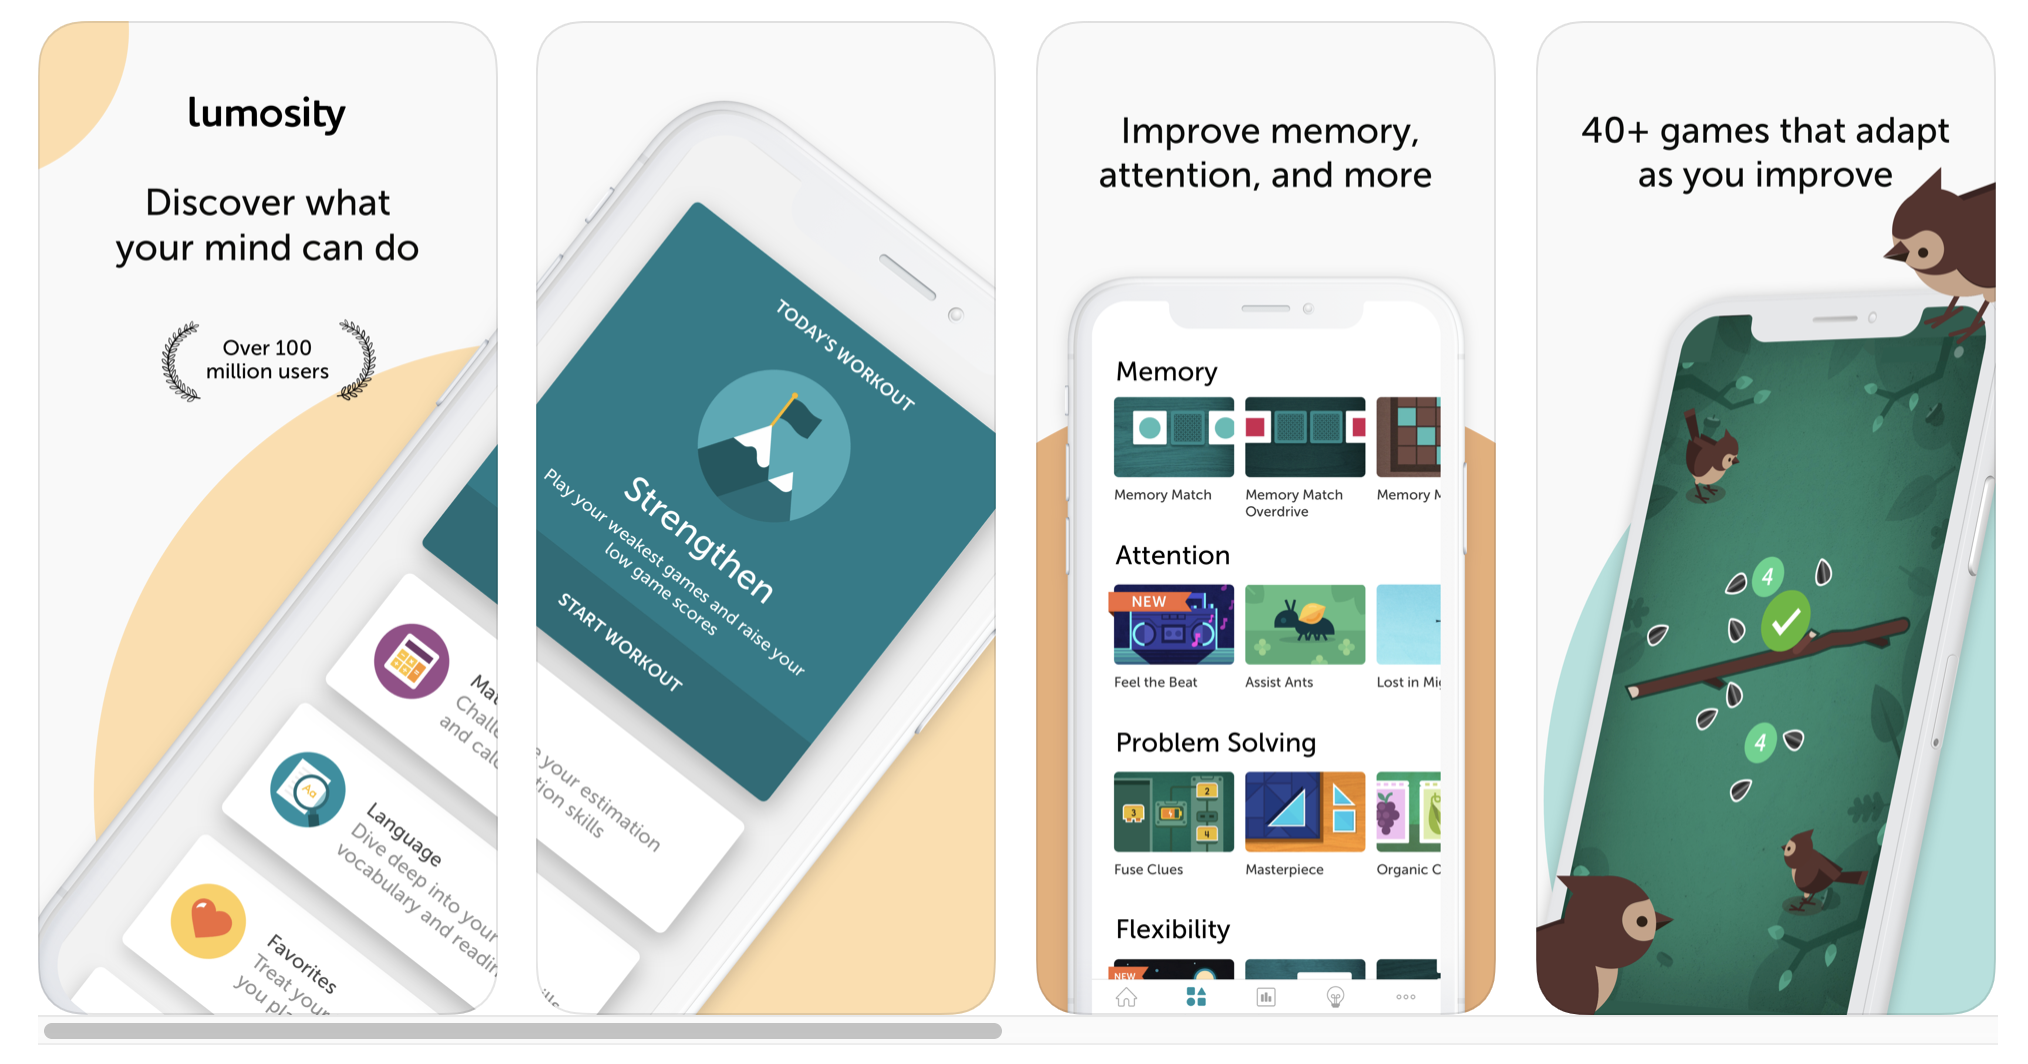 Four screen shots from the Lumosity app